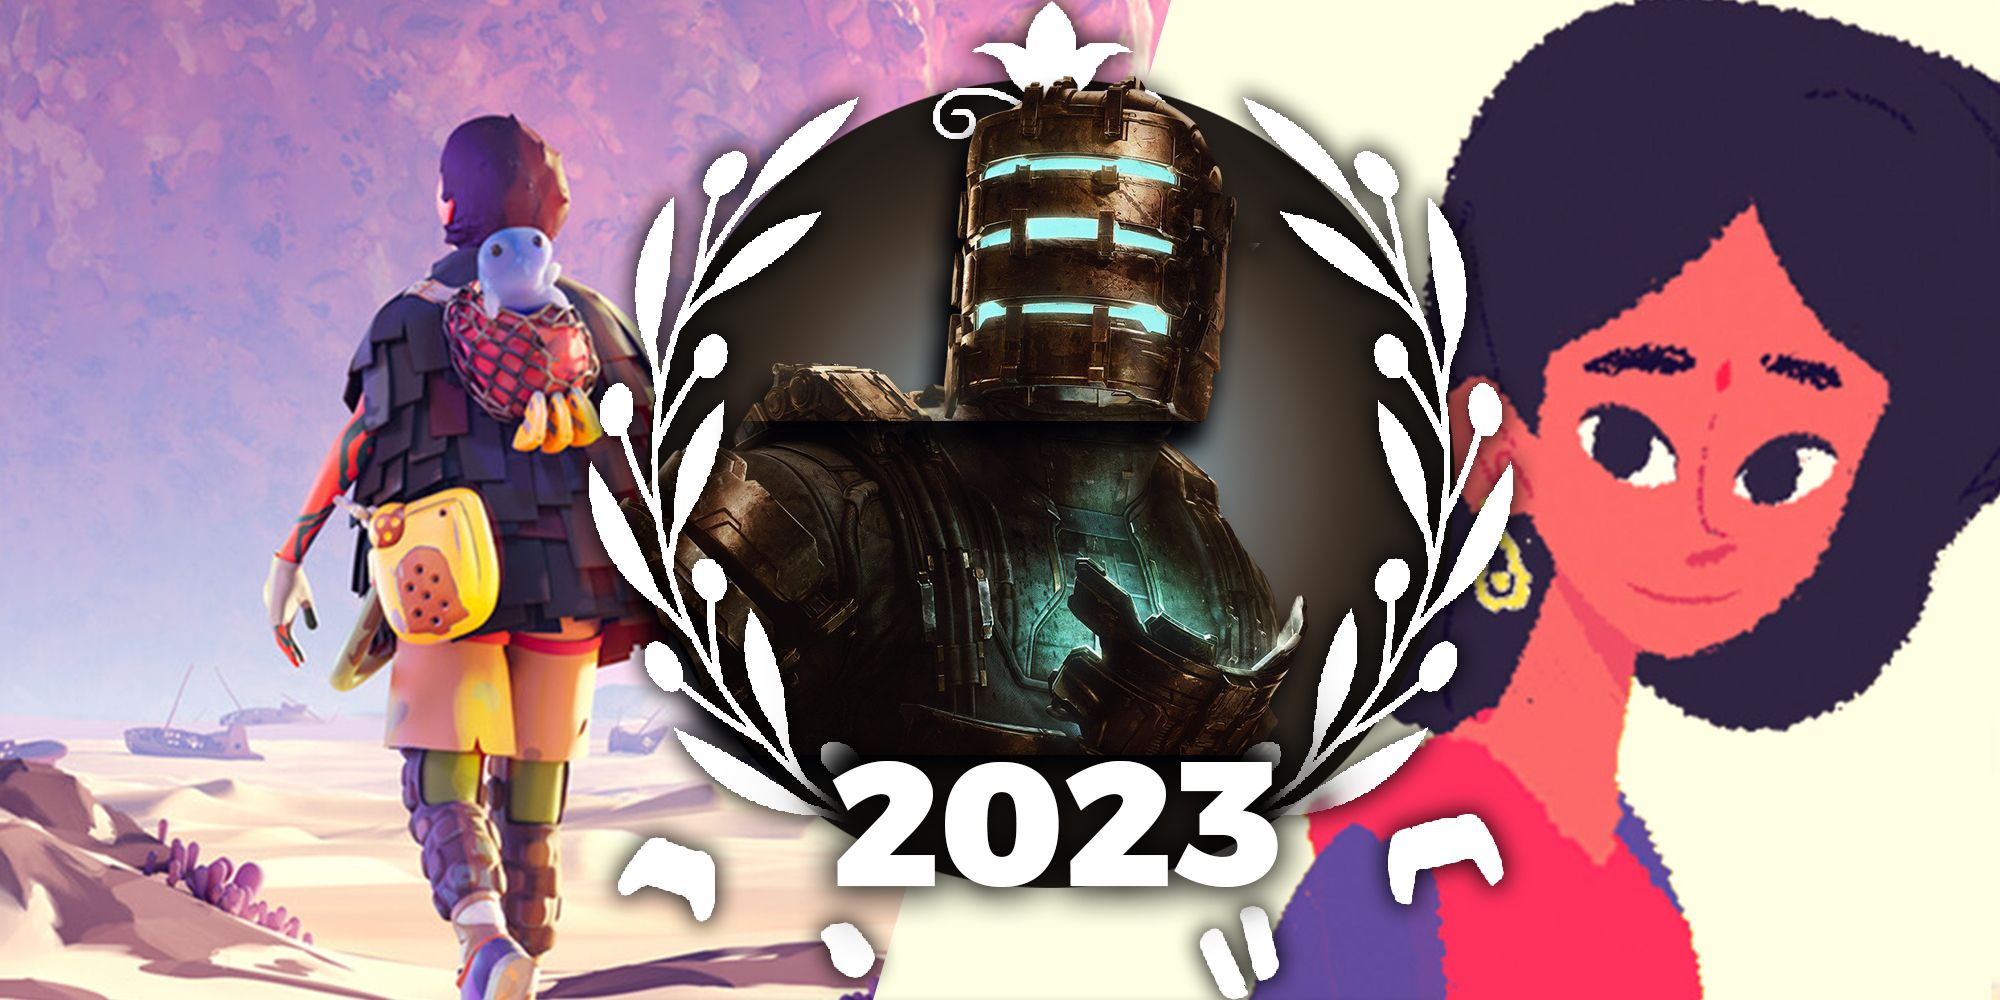 2023 GOTY logo with Jusant protagonist, Venba, and Isaac Clarke from Dead Space prominently featured